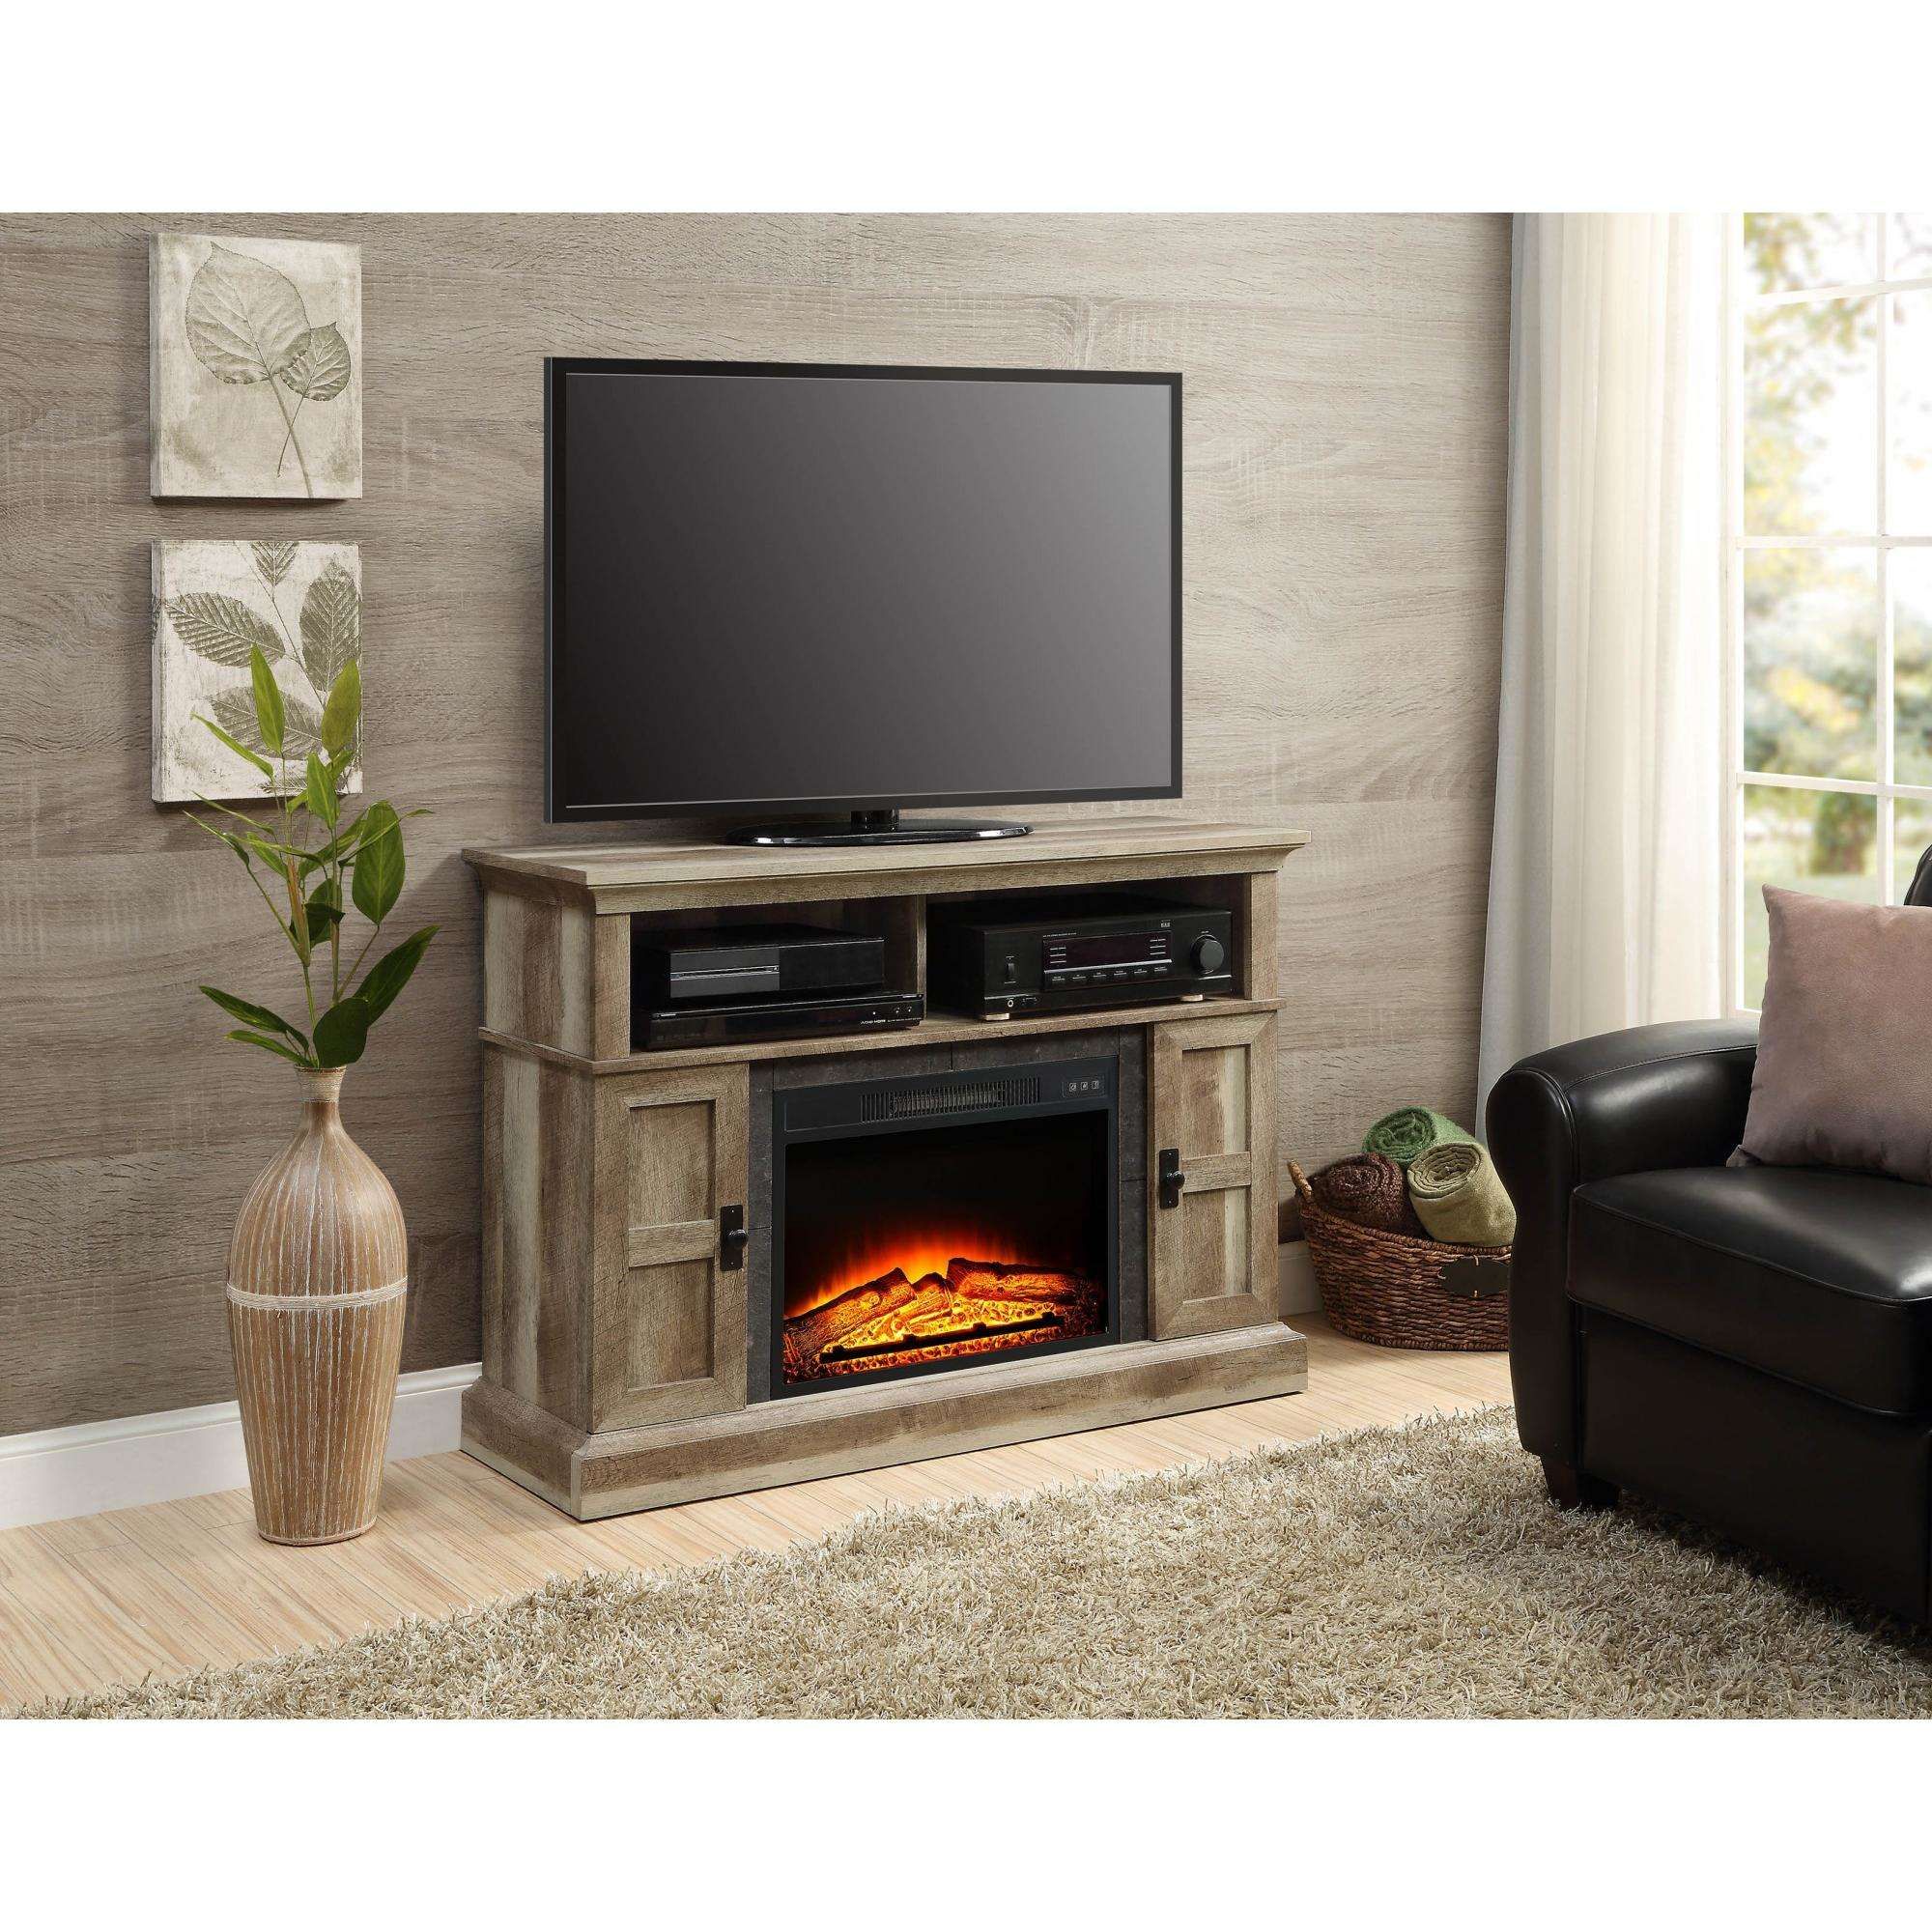 Wood Entertainment Center with Fireplace Elegant Whalen Media Fireplace for Your Home Television Stand Fits